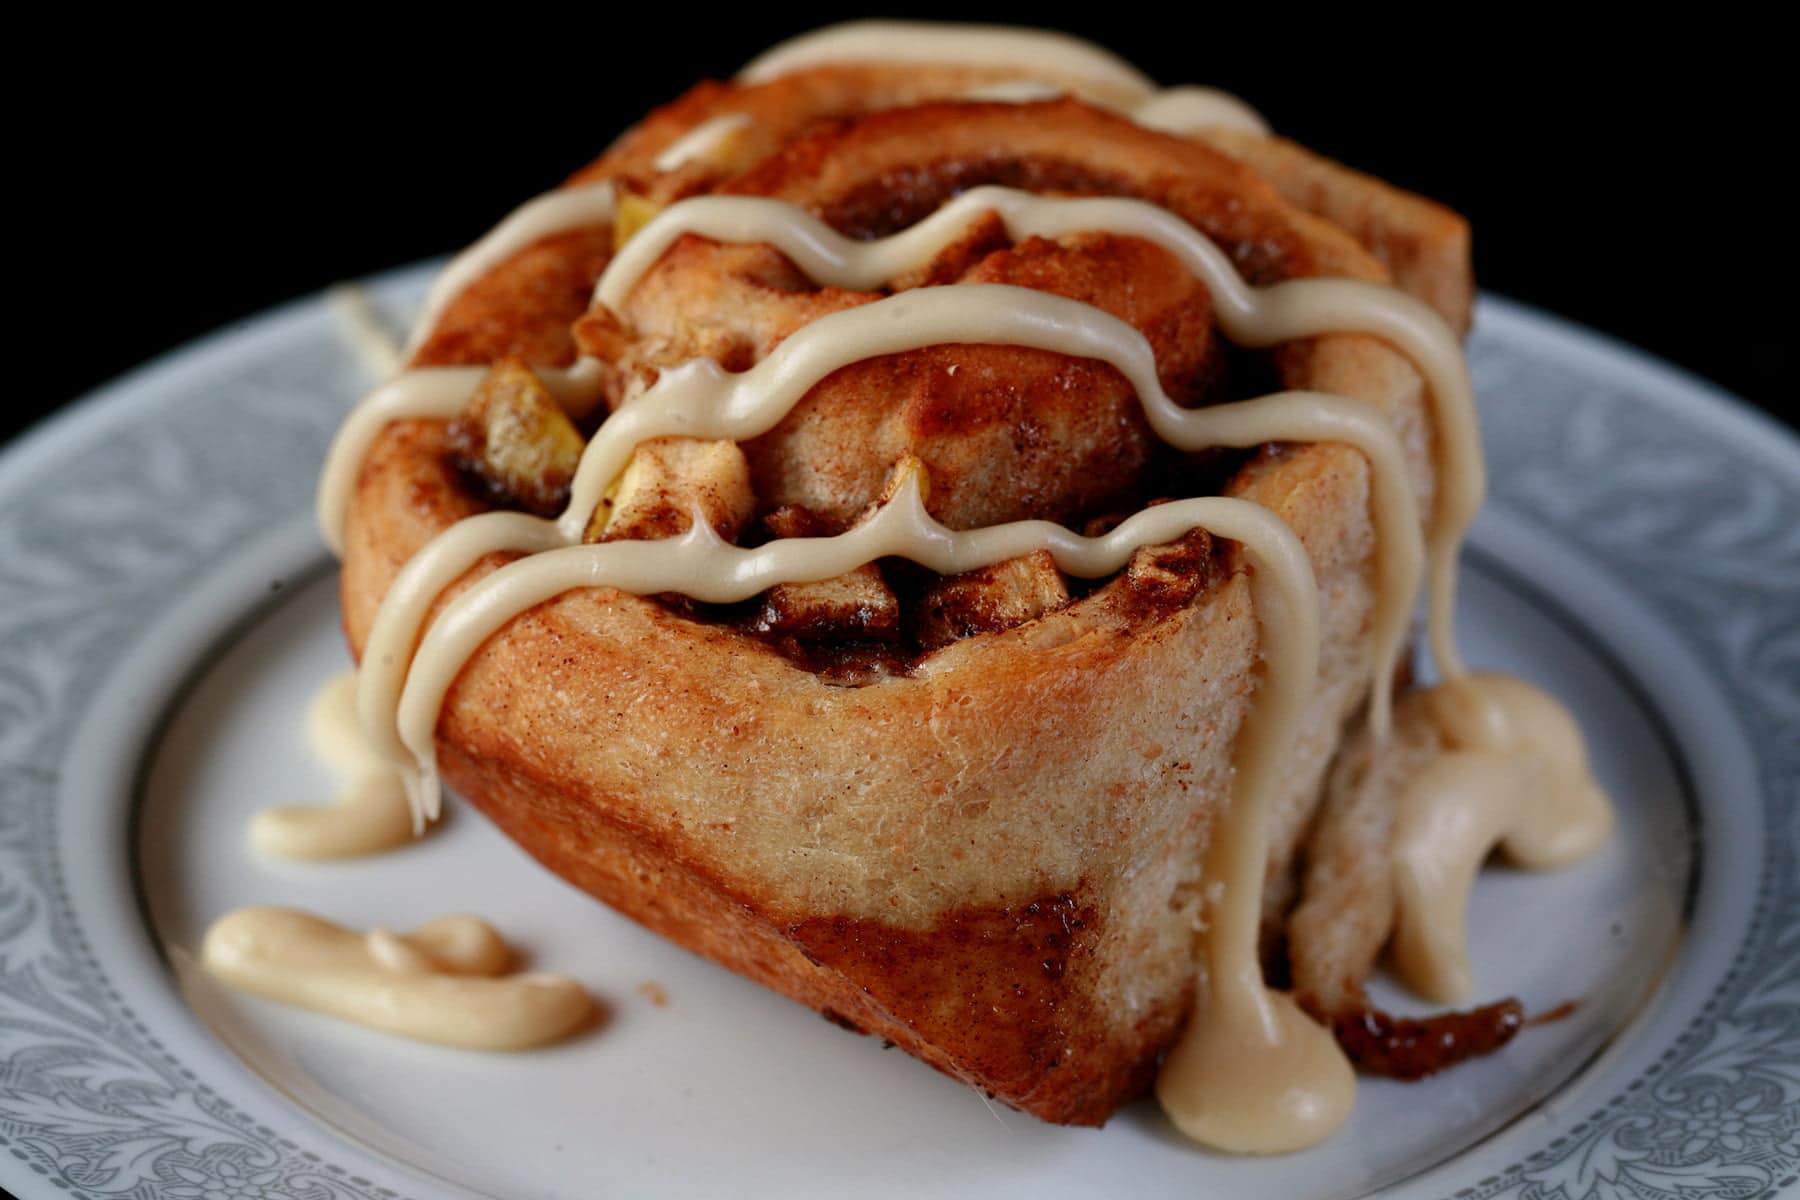 Close up photo of an apple cinnamon roll - a cinnamon roll, with small pieces of apple throughout the cinnamon swirl - drizzled with maple glaze.